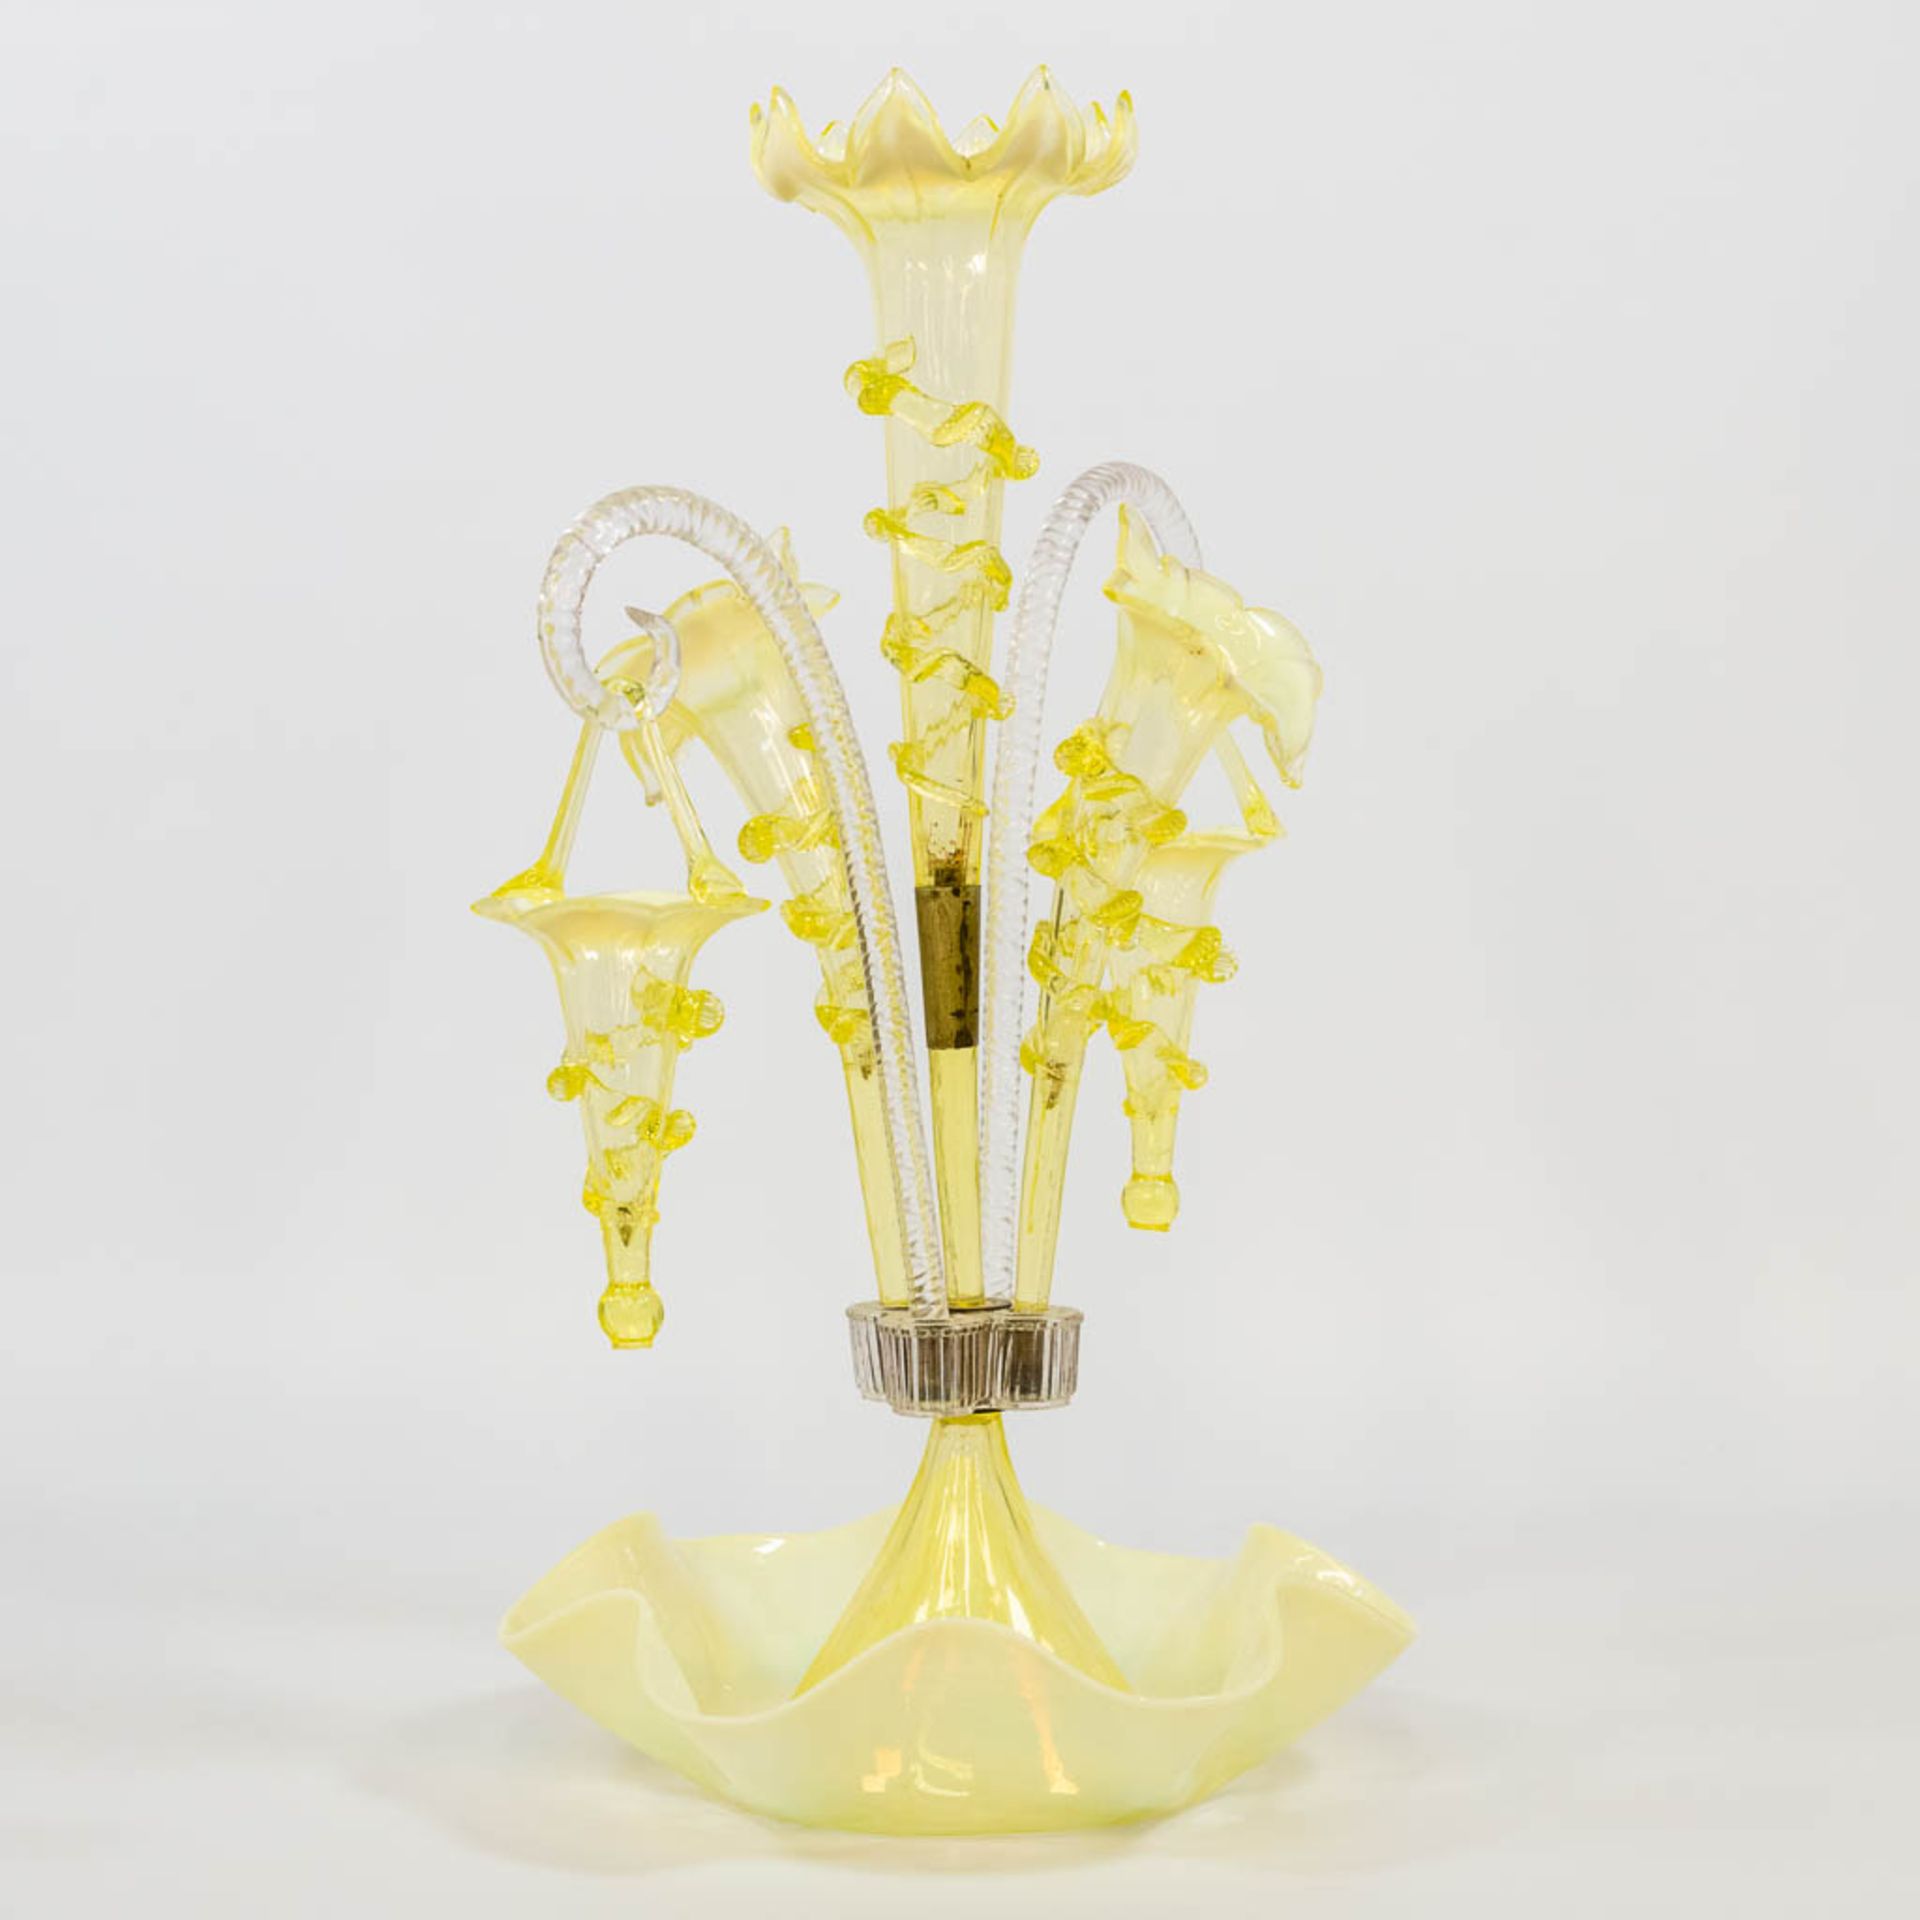 A yellow and clear glass table centrepiece pic-fleur, made in Murano, Italy. (25 x 28 x 45 cm) - Image 3 of 15